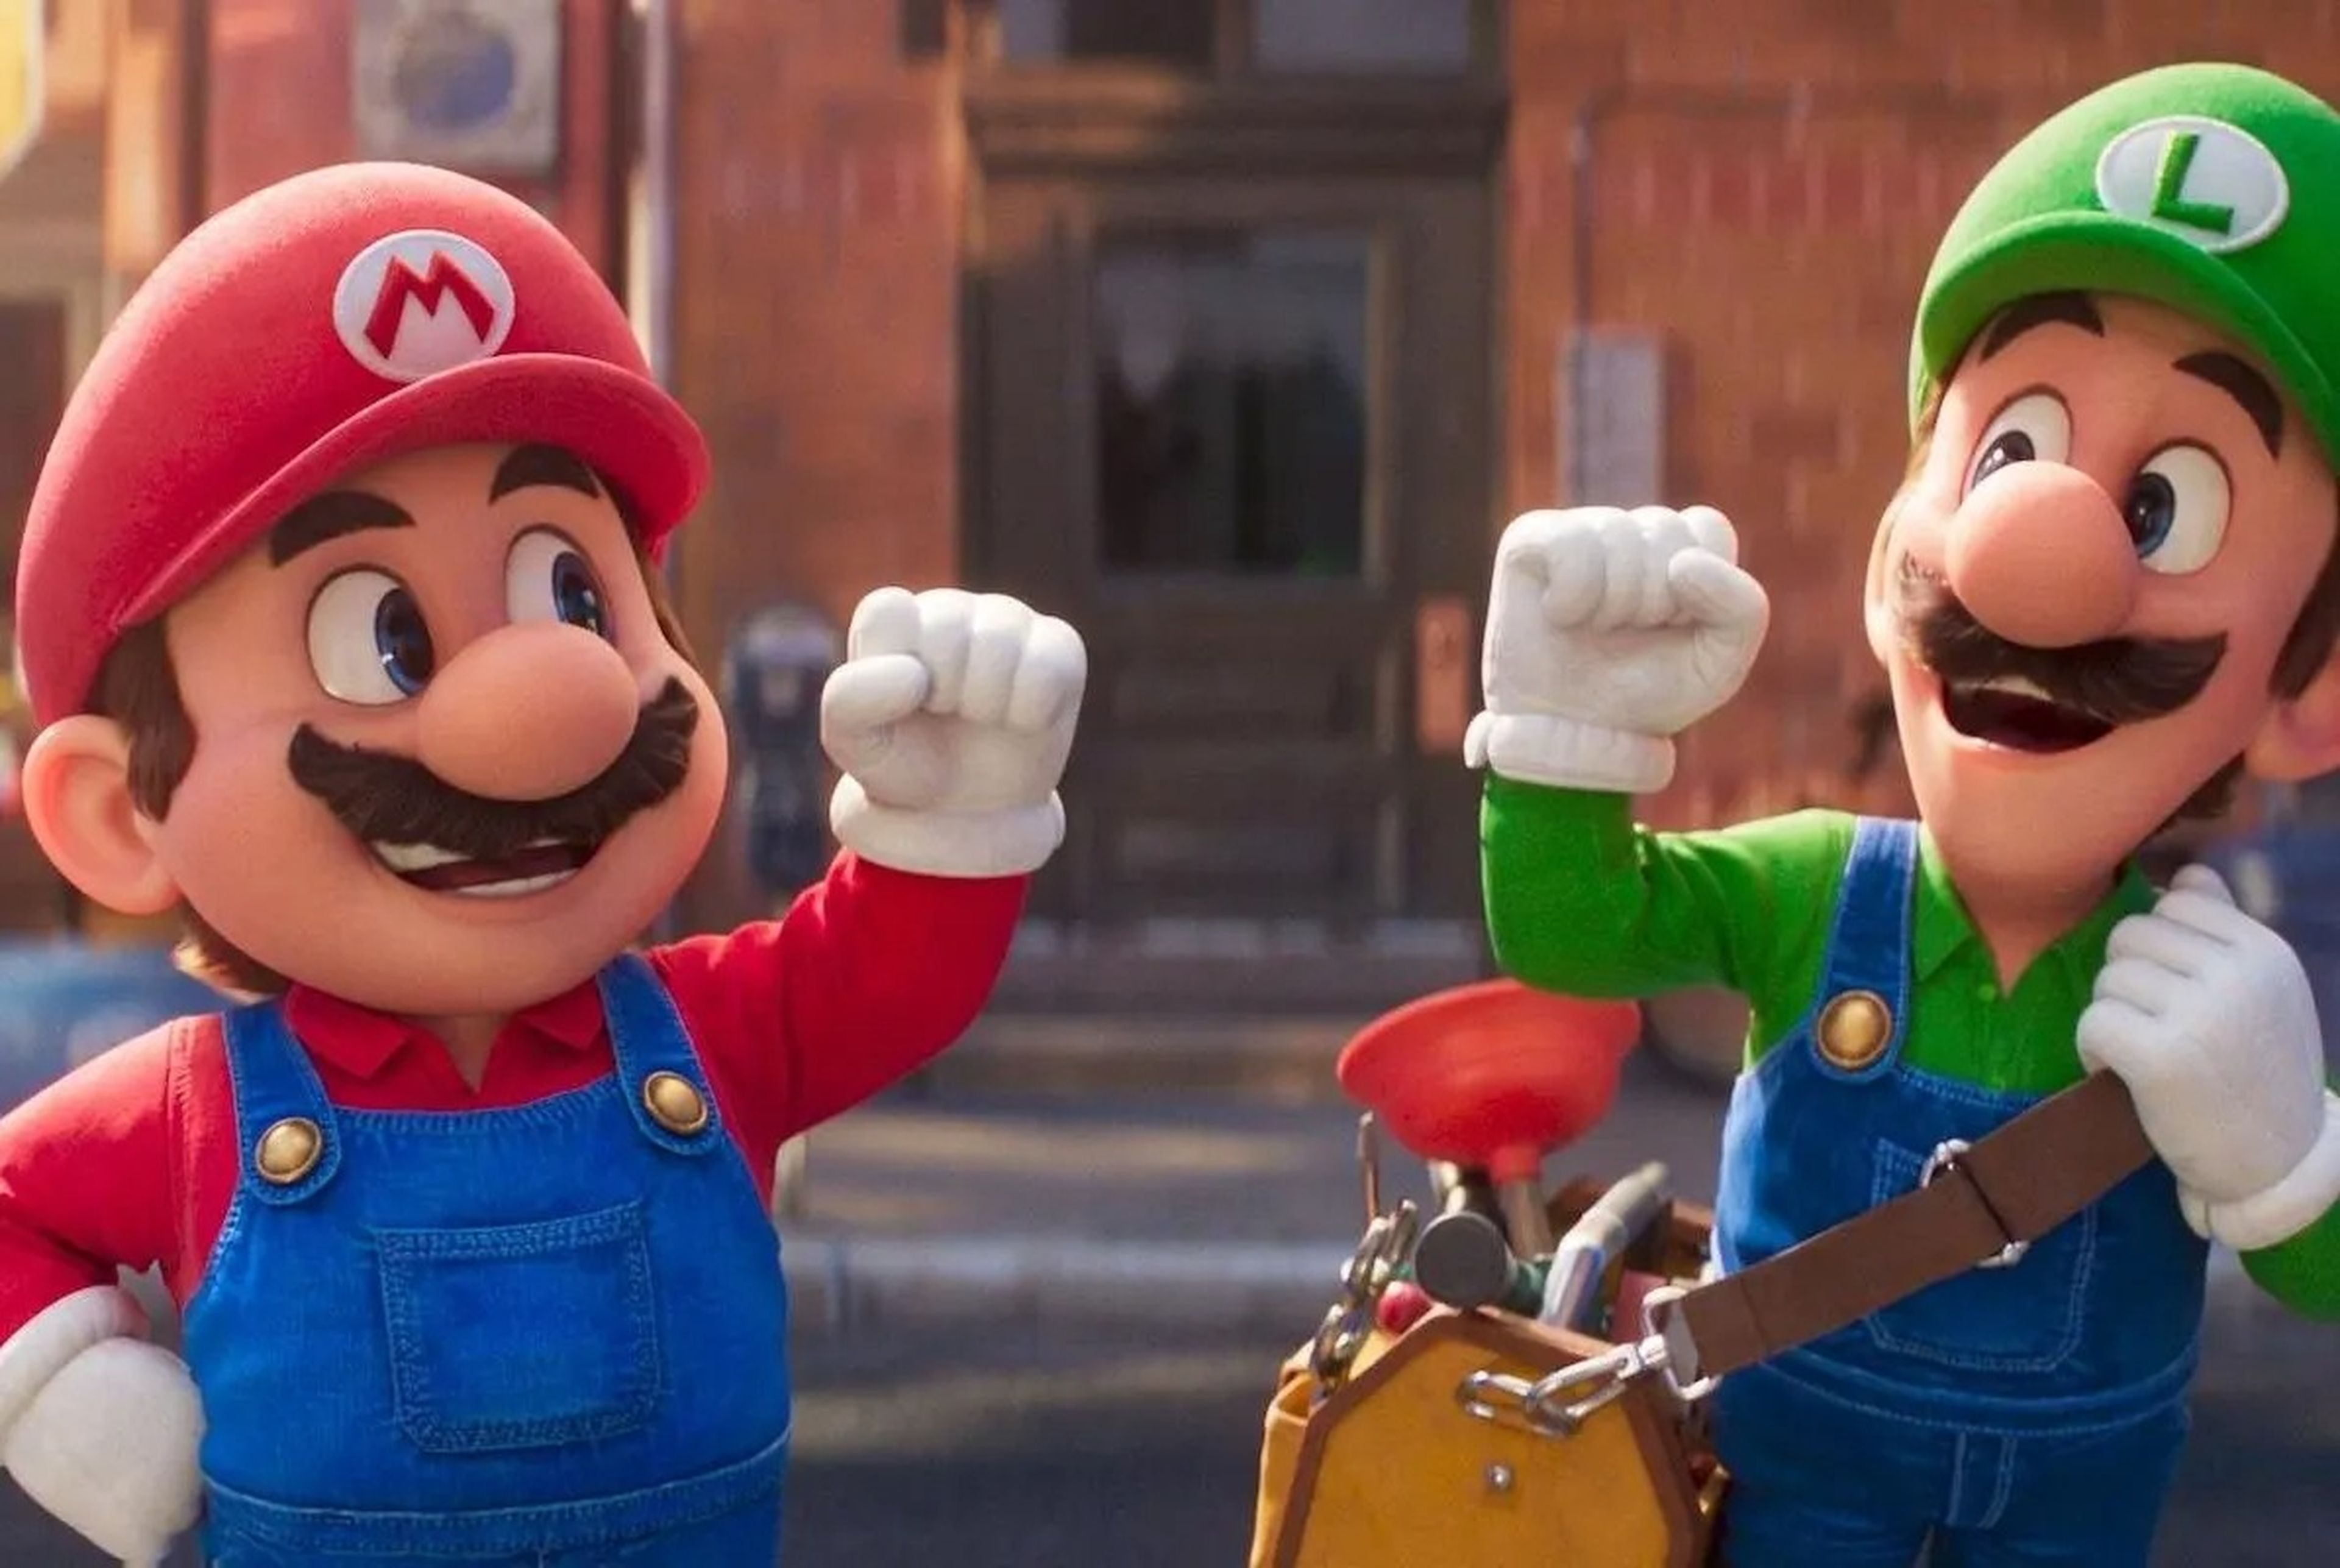 Mario and luigi holding up their fists